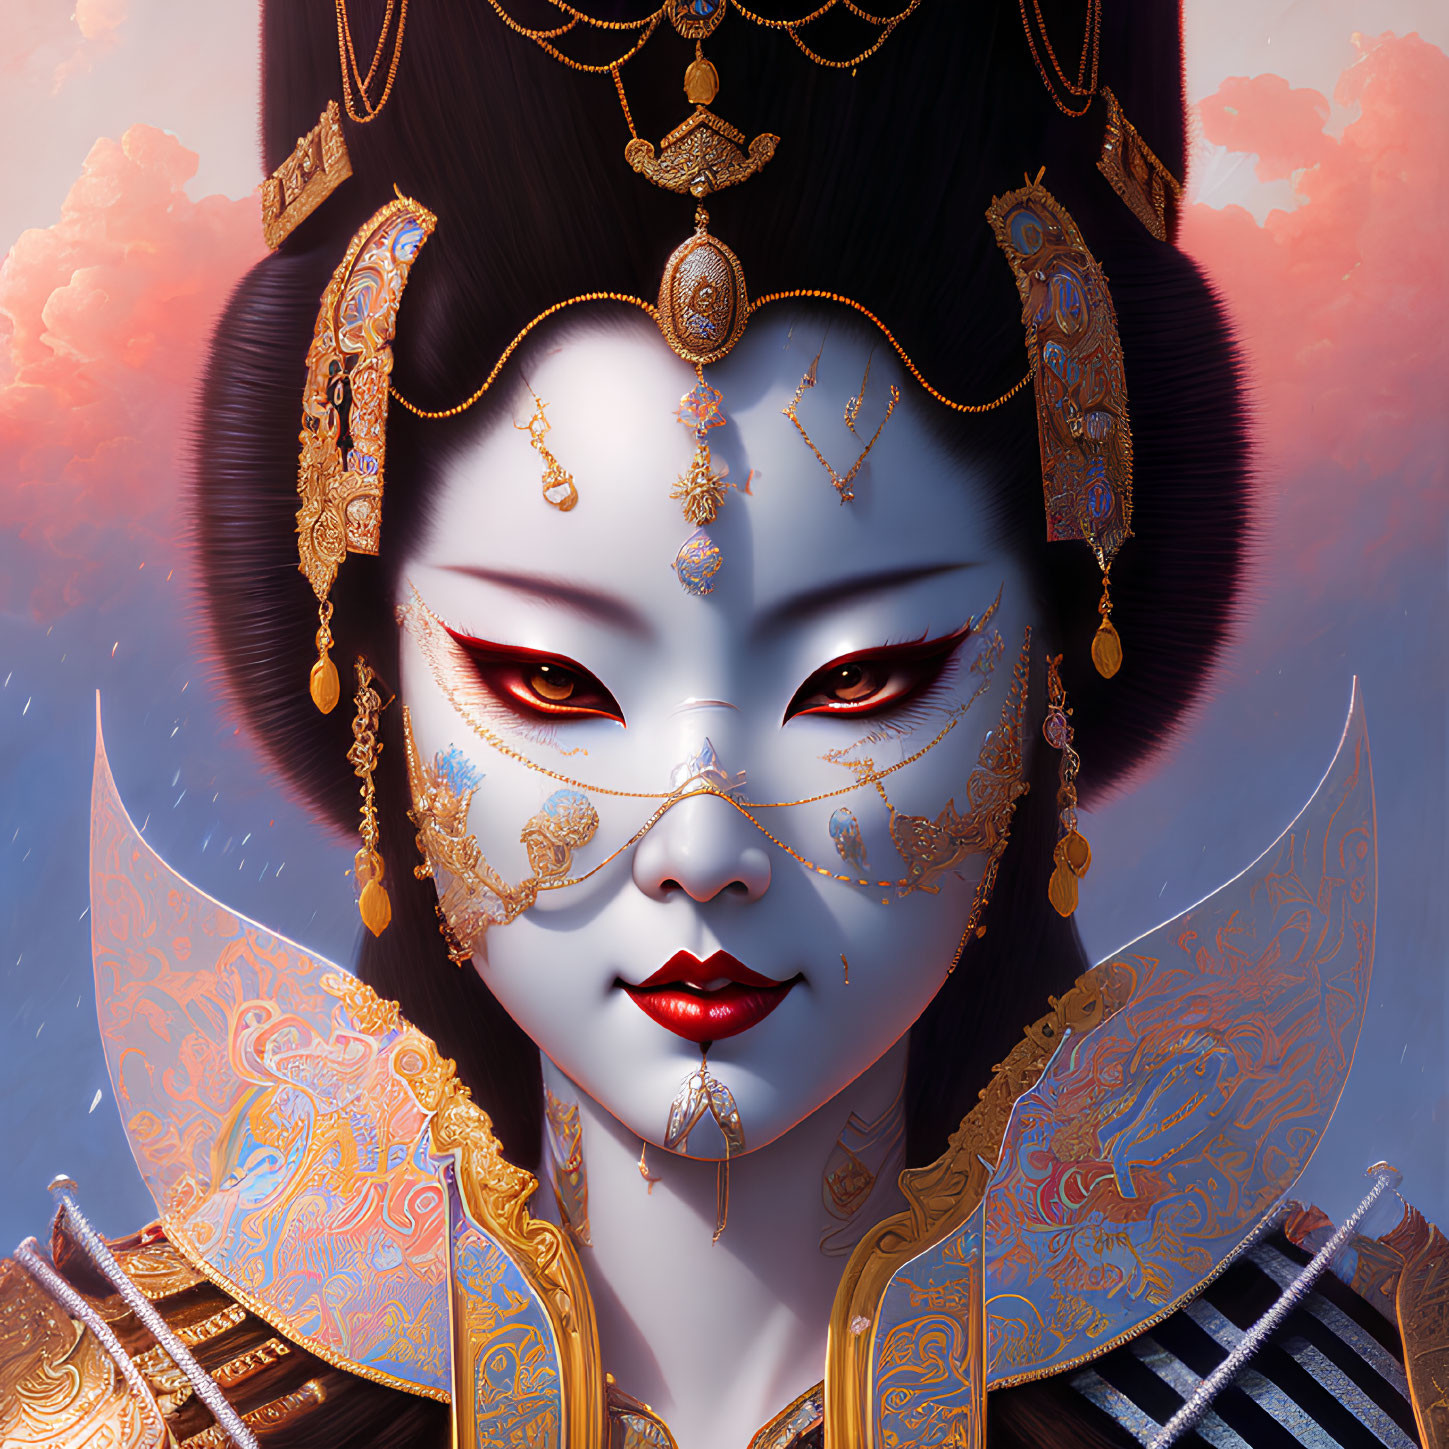 Detailed digital portrait of a woman with Asian features and ornate attire.